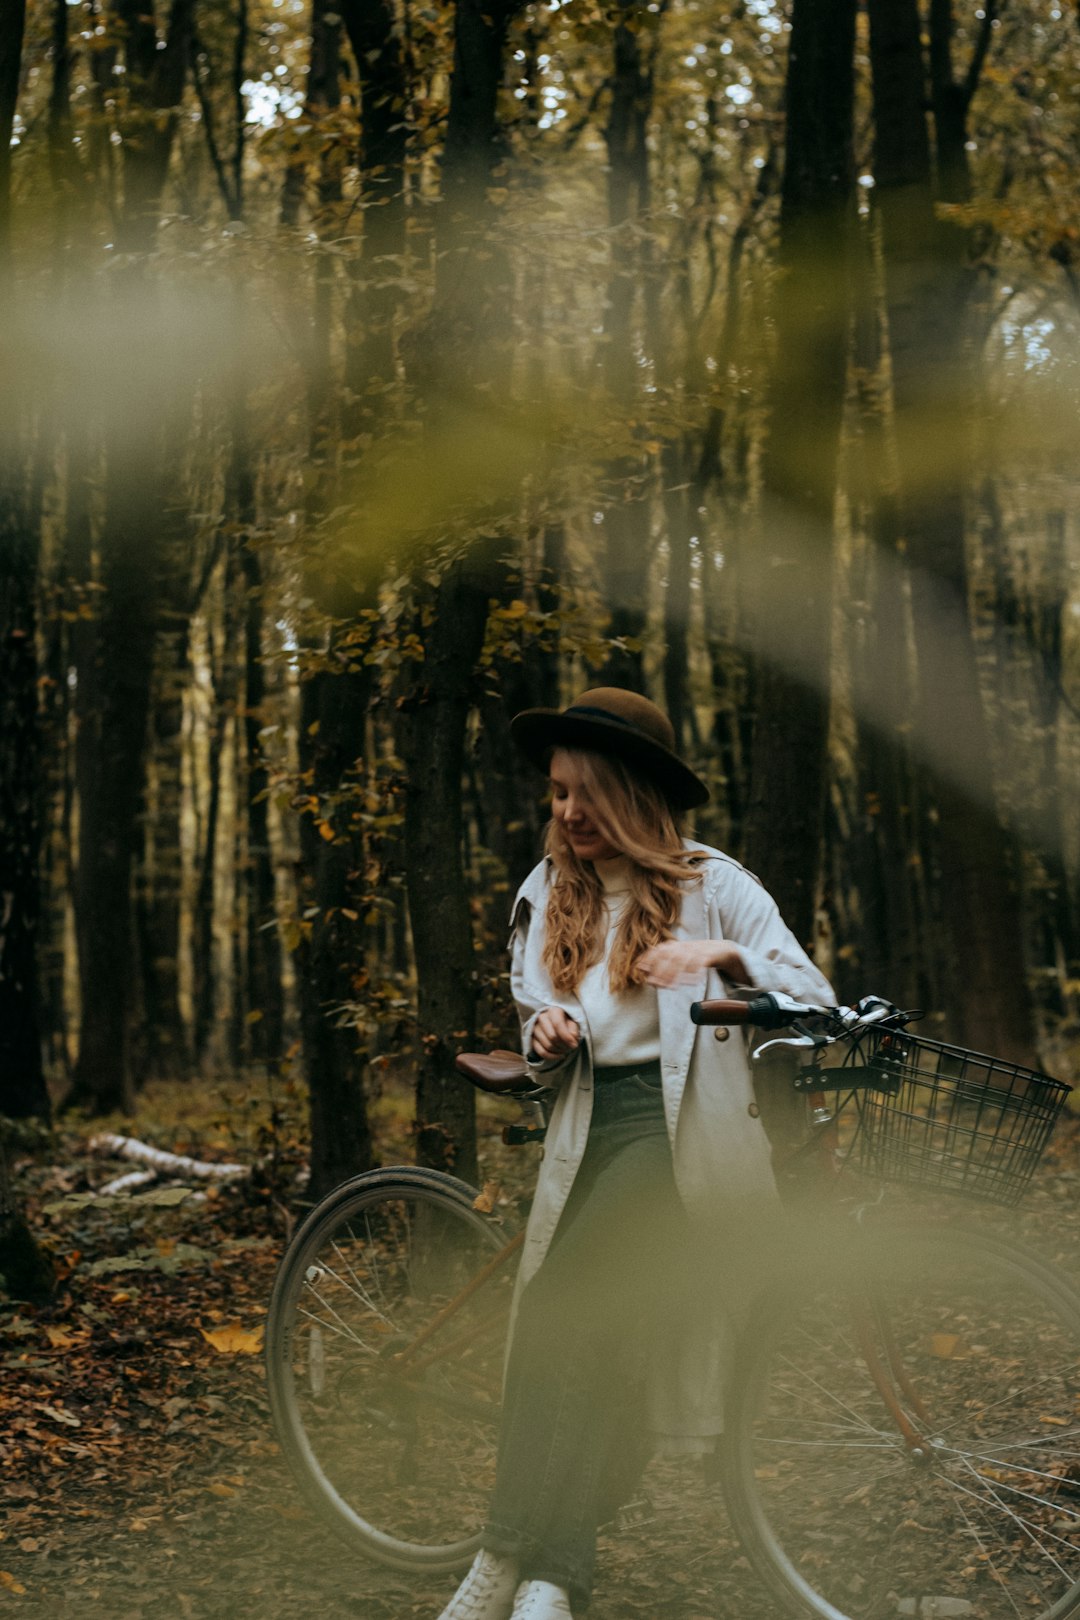 woman in white long sleeve shirt riding on bicycle